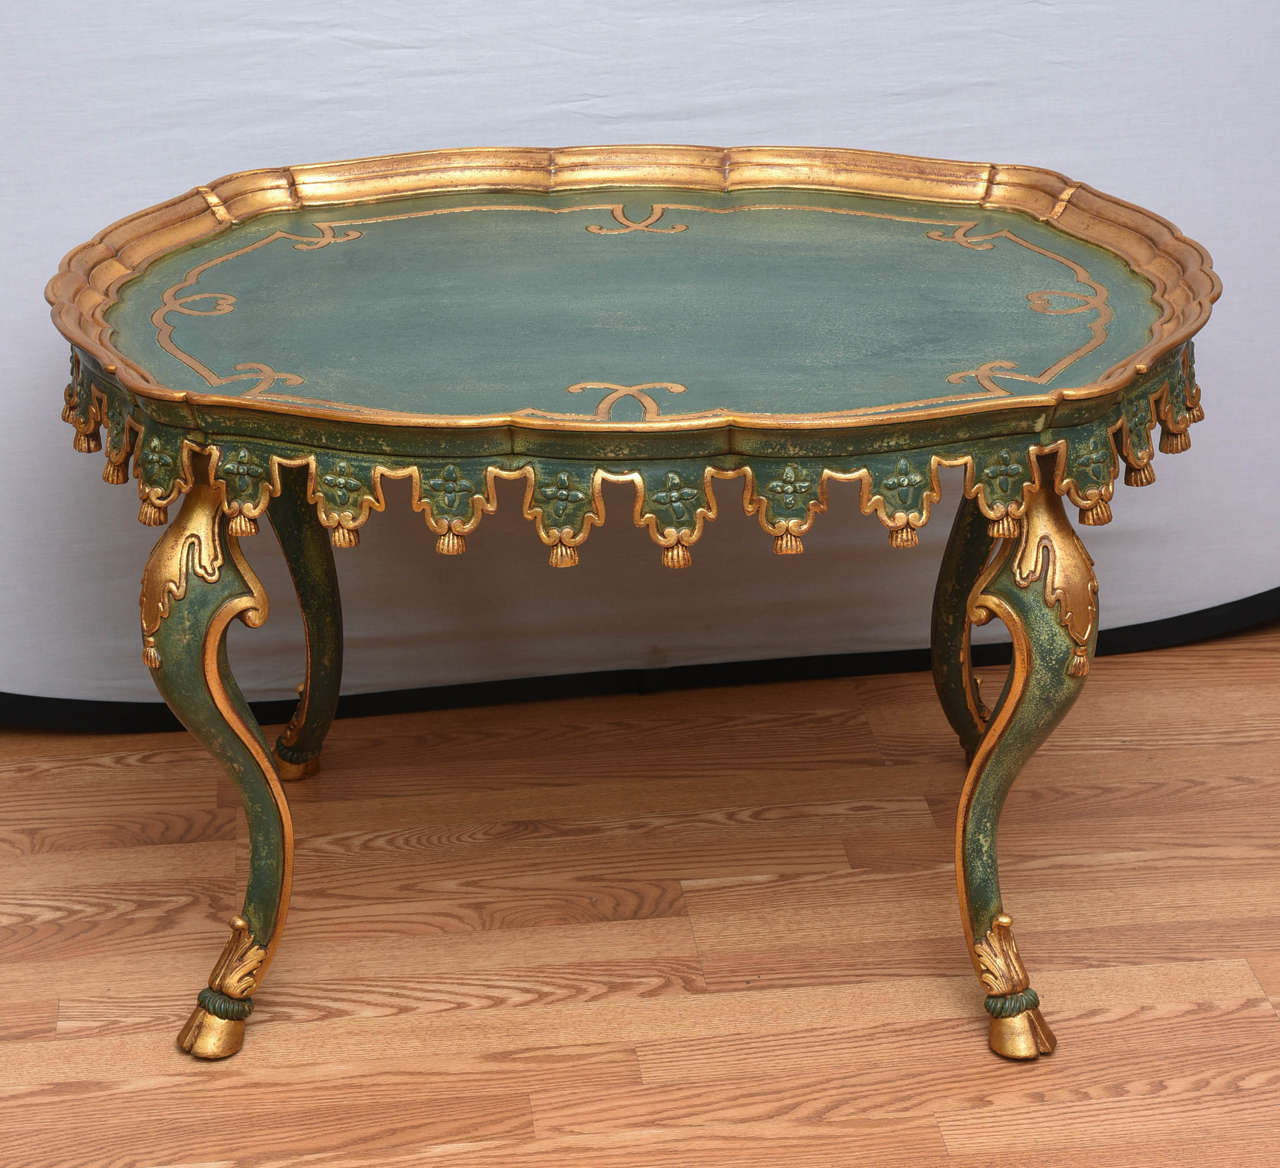 Interesting teal and gold carved wood tea height table.